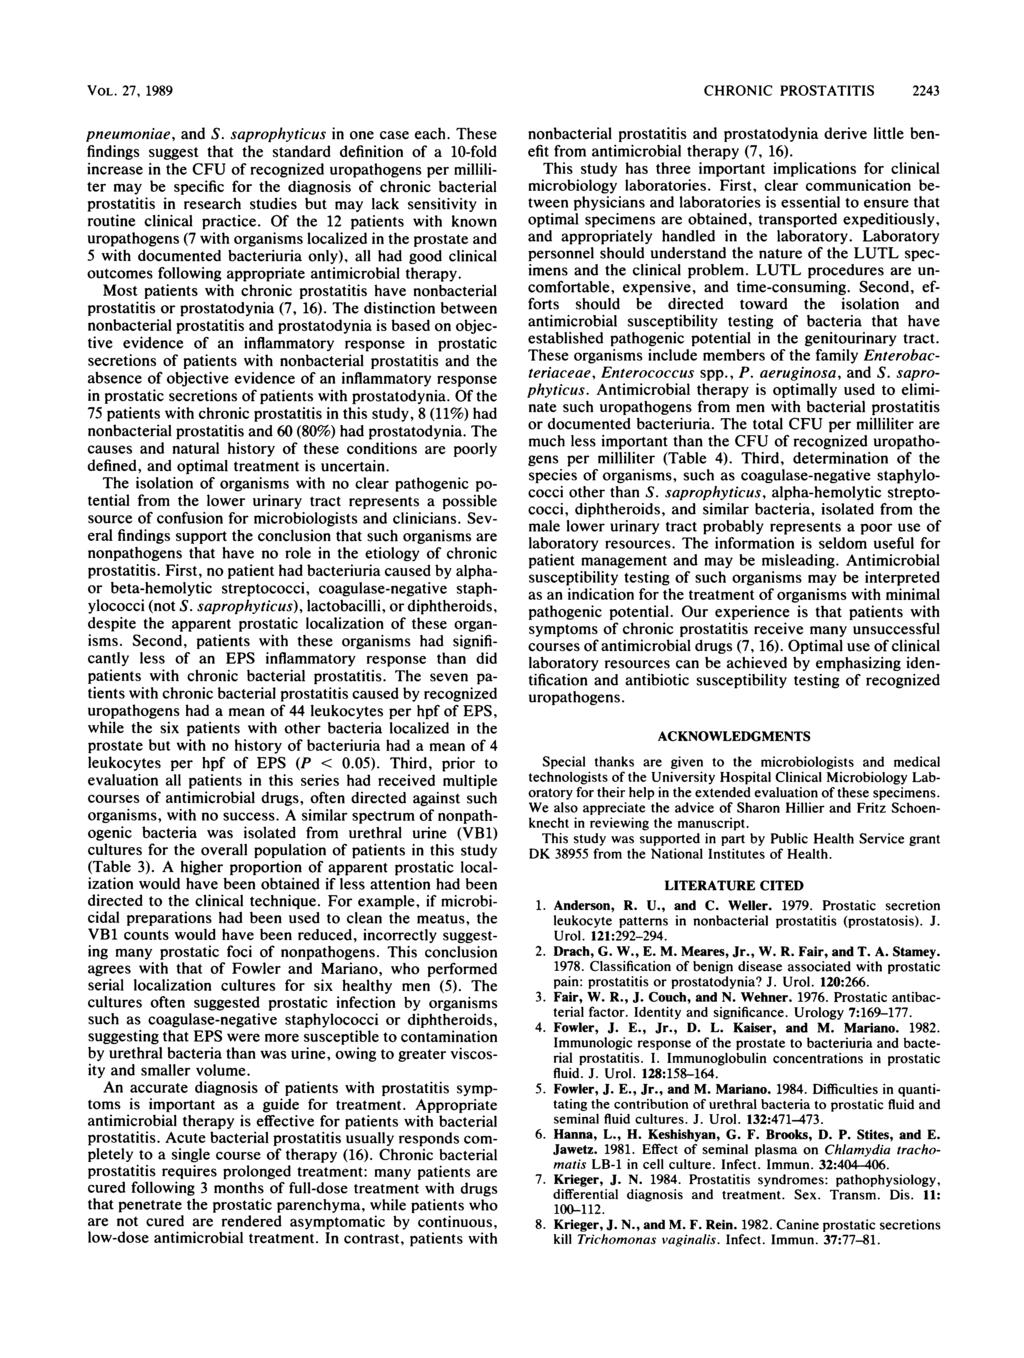 VOL. 27, 1989 pneumoniae, and S. saprophyticus in one case each.